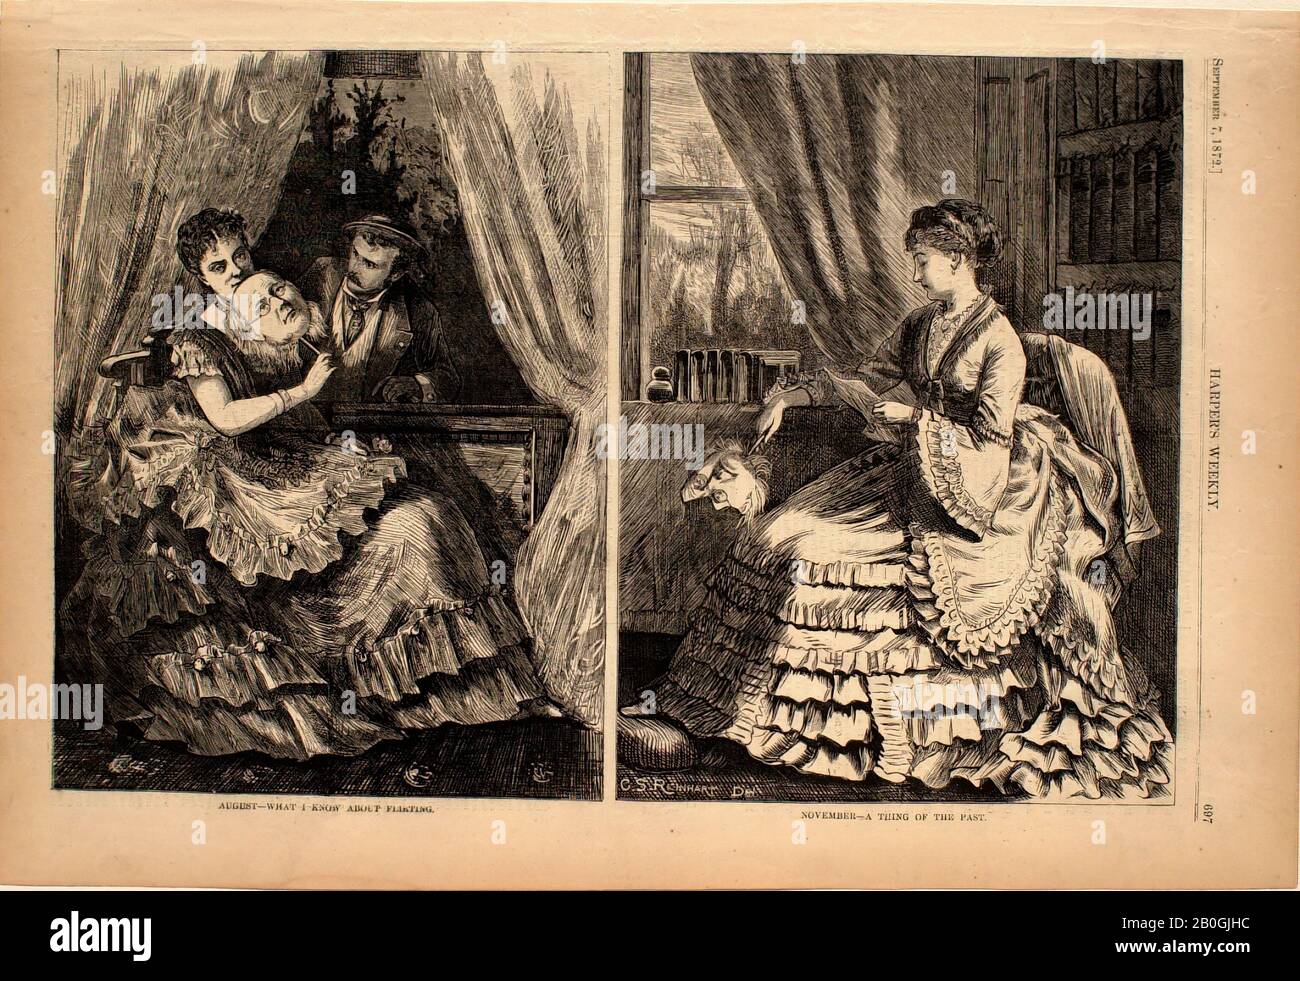 Charles Stanley Reinhart, American, 1844–1896, August—What I Knew about Flirting, and November—A Thing of the Past, 1872, Wood engraving on paper, image: 9 1/8 x 13 3/4 in. (23.2 x 35 cm Stock Photo